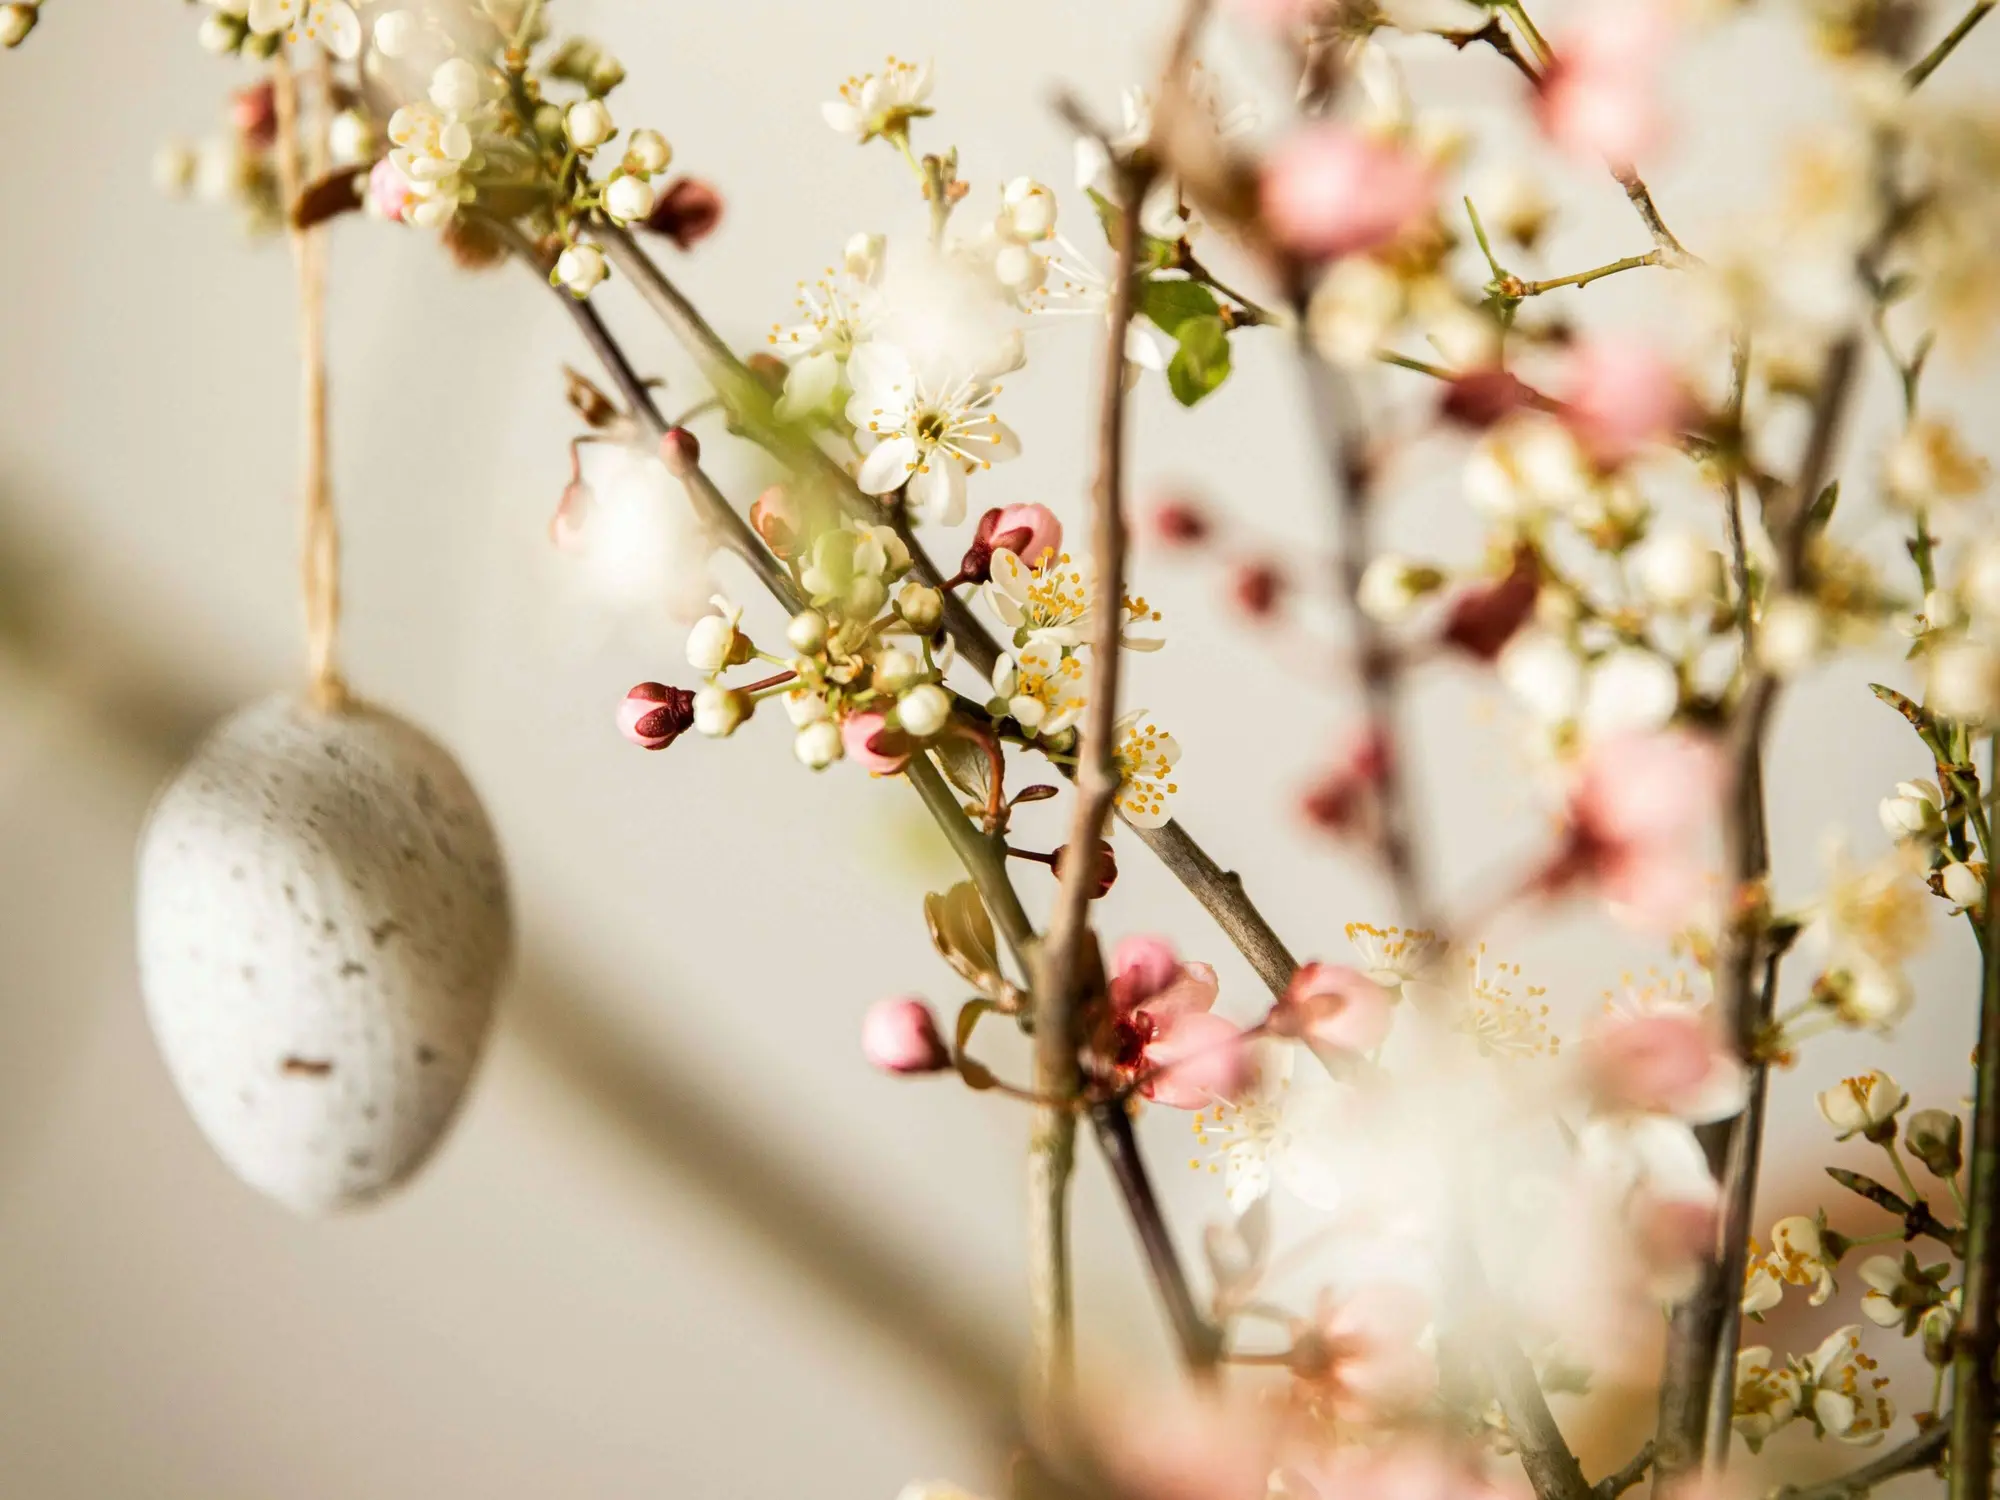 Branches with flowers and Easter decorations (c) Photo Kaja Reichardt / Unsplash